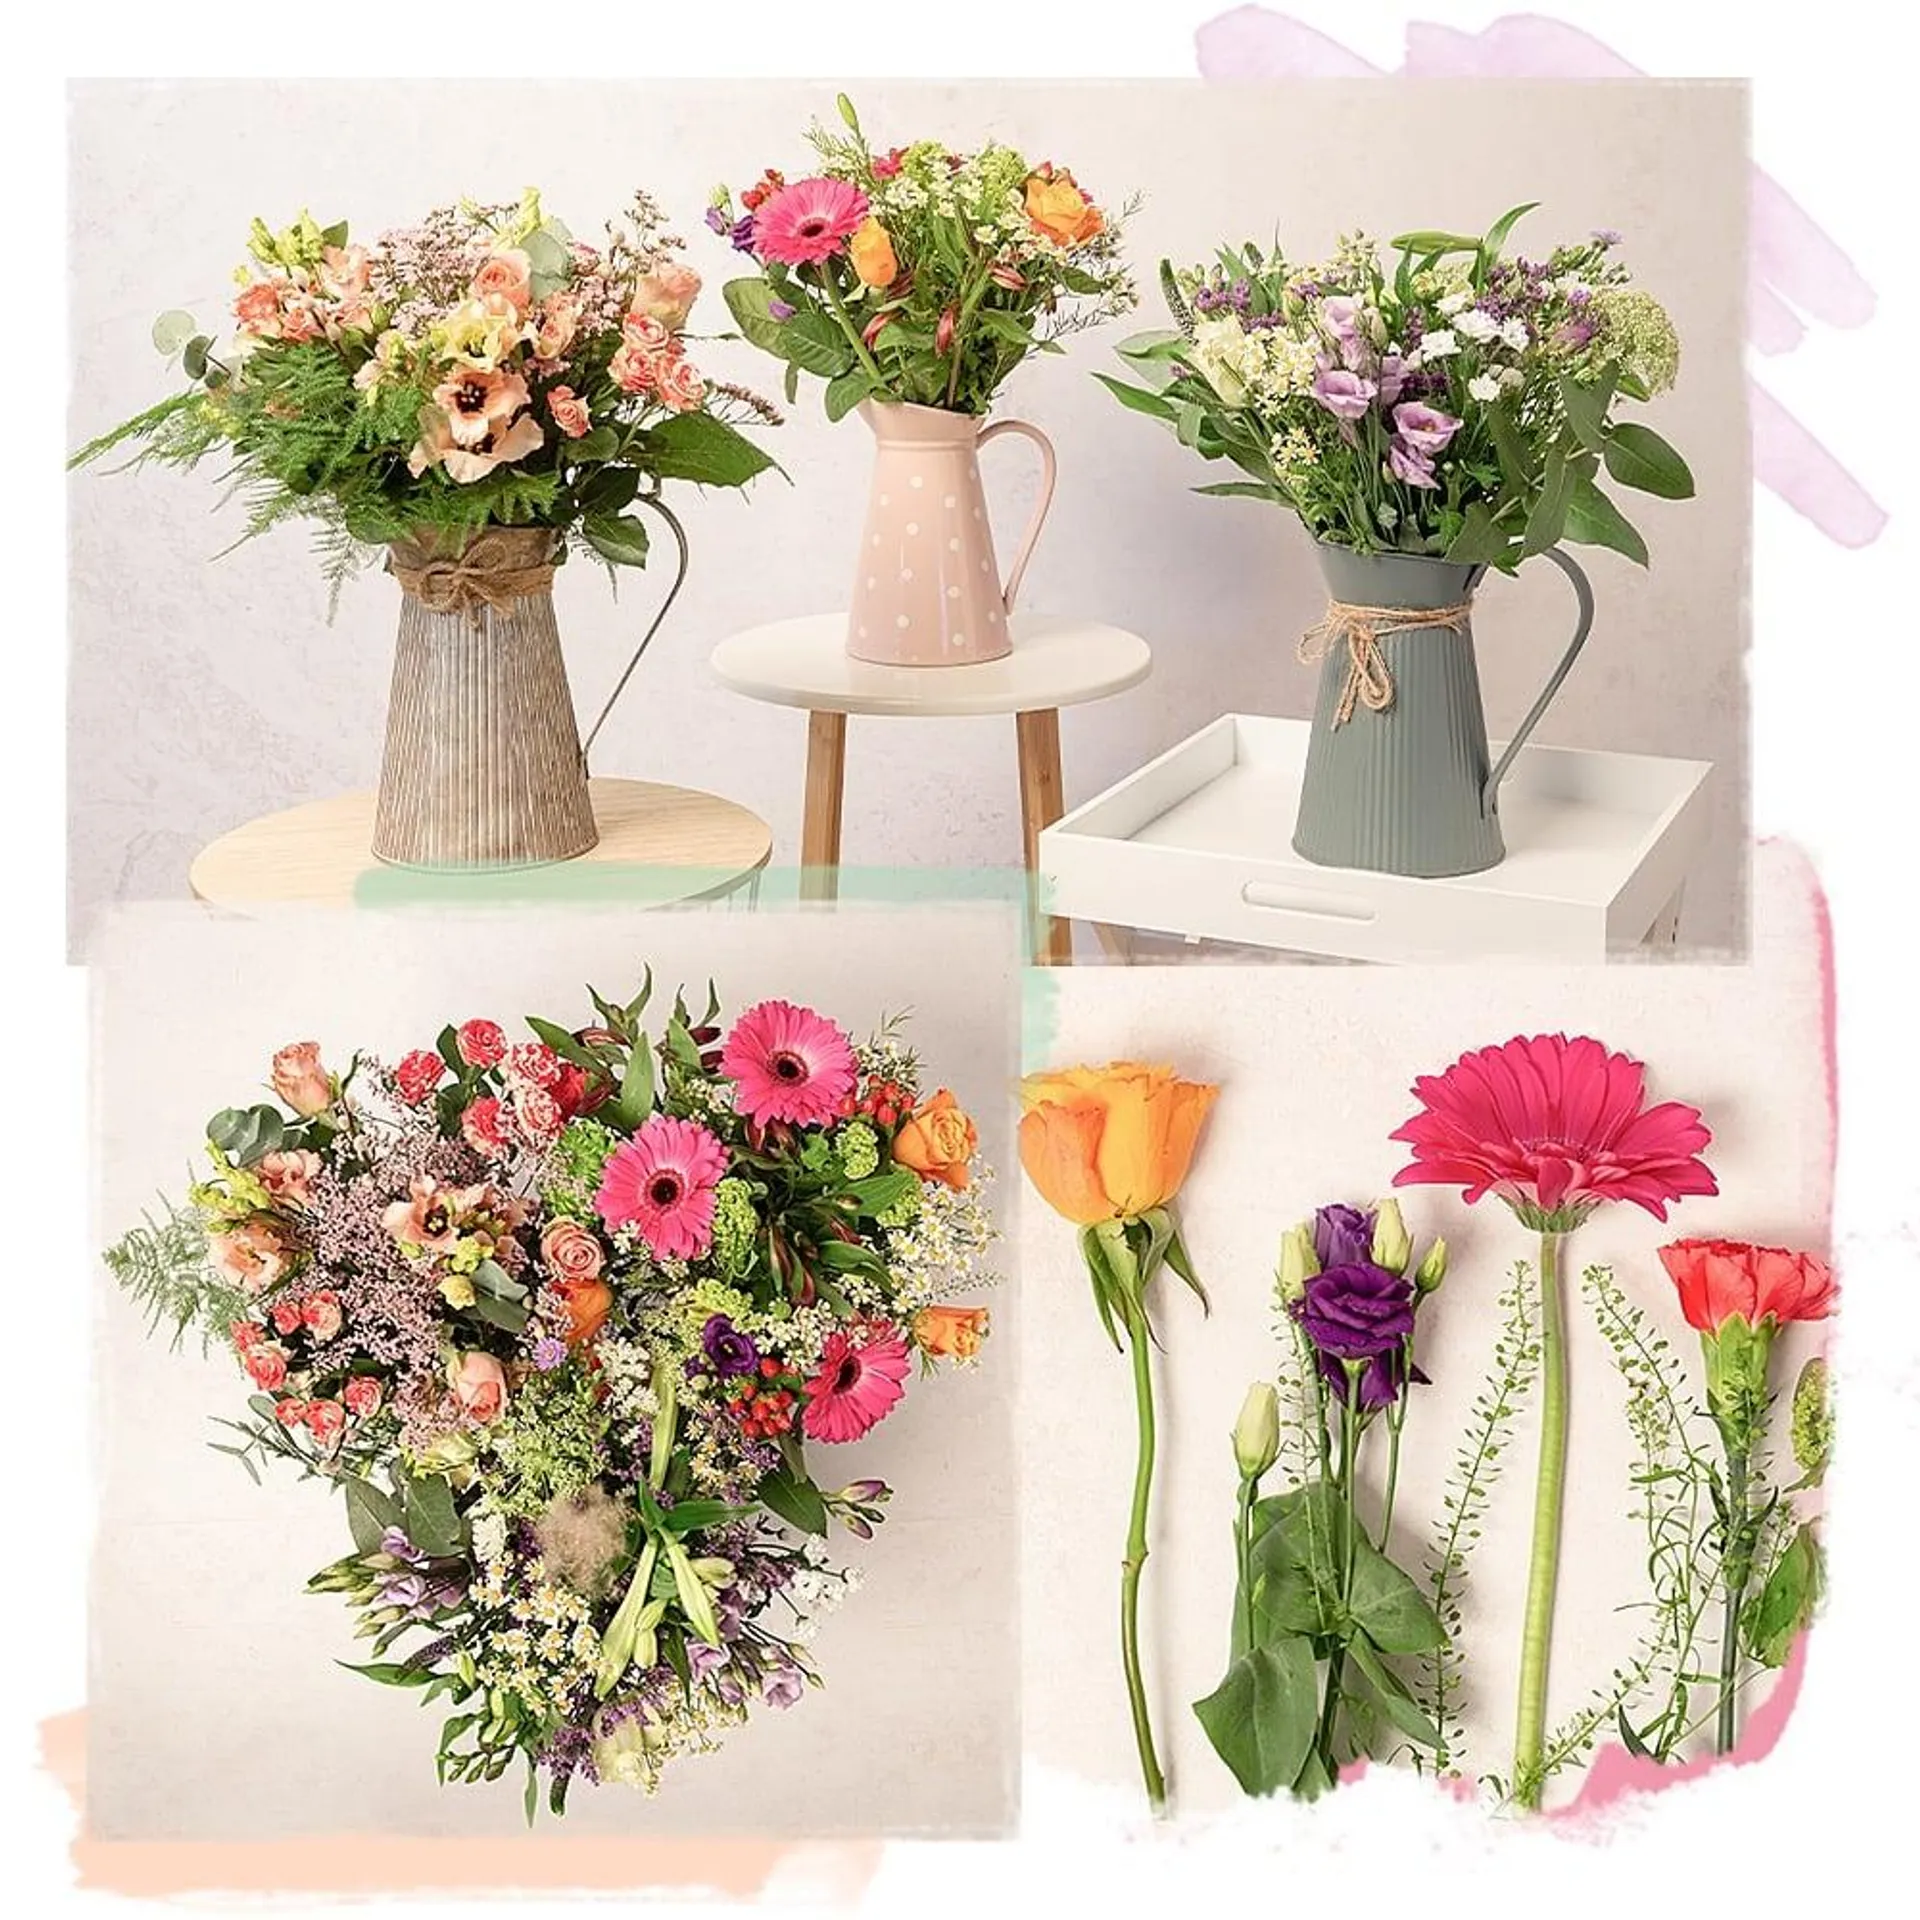 Fresh seasonal blooms, just for you straight from the flower markets.